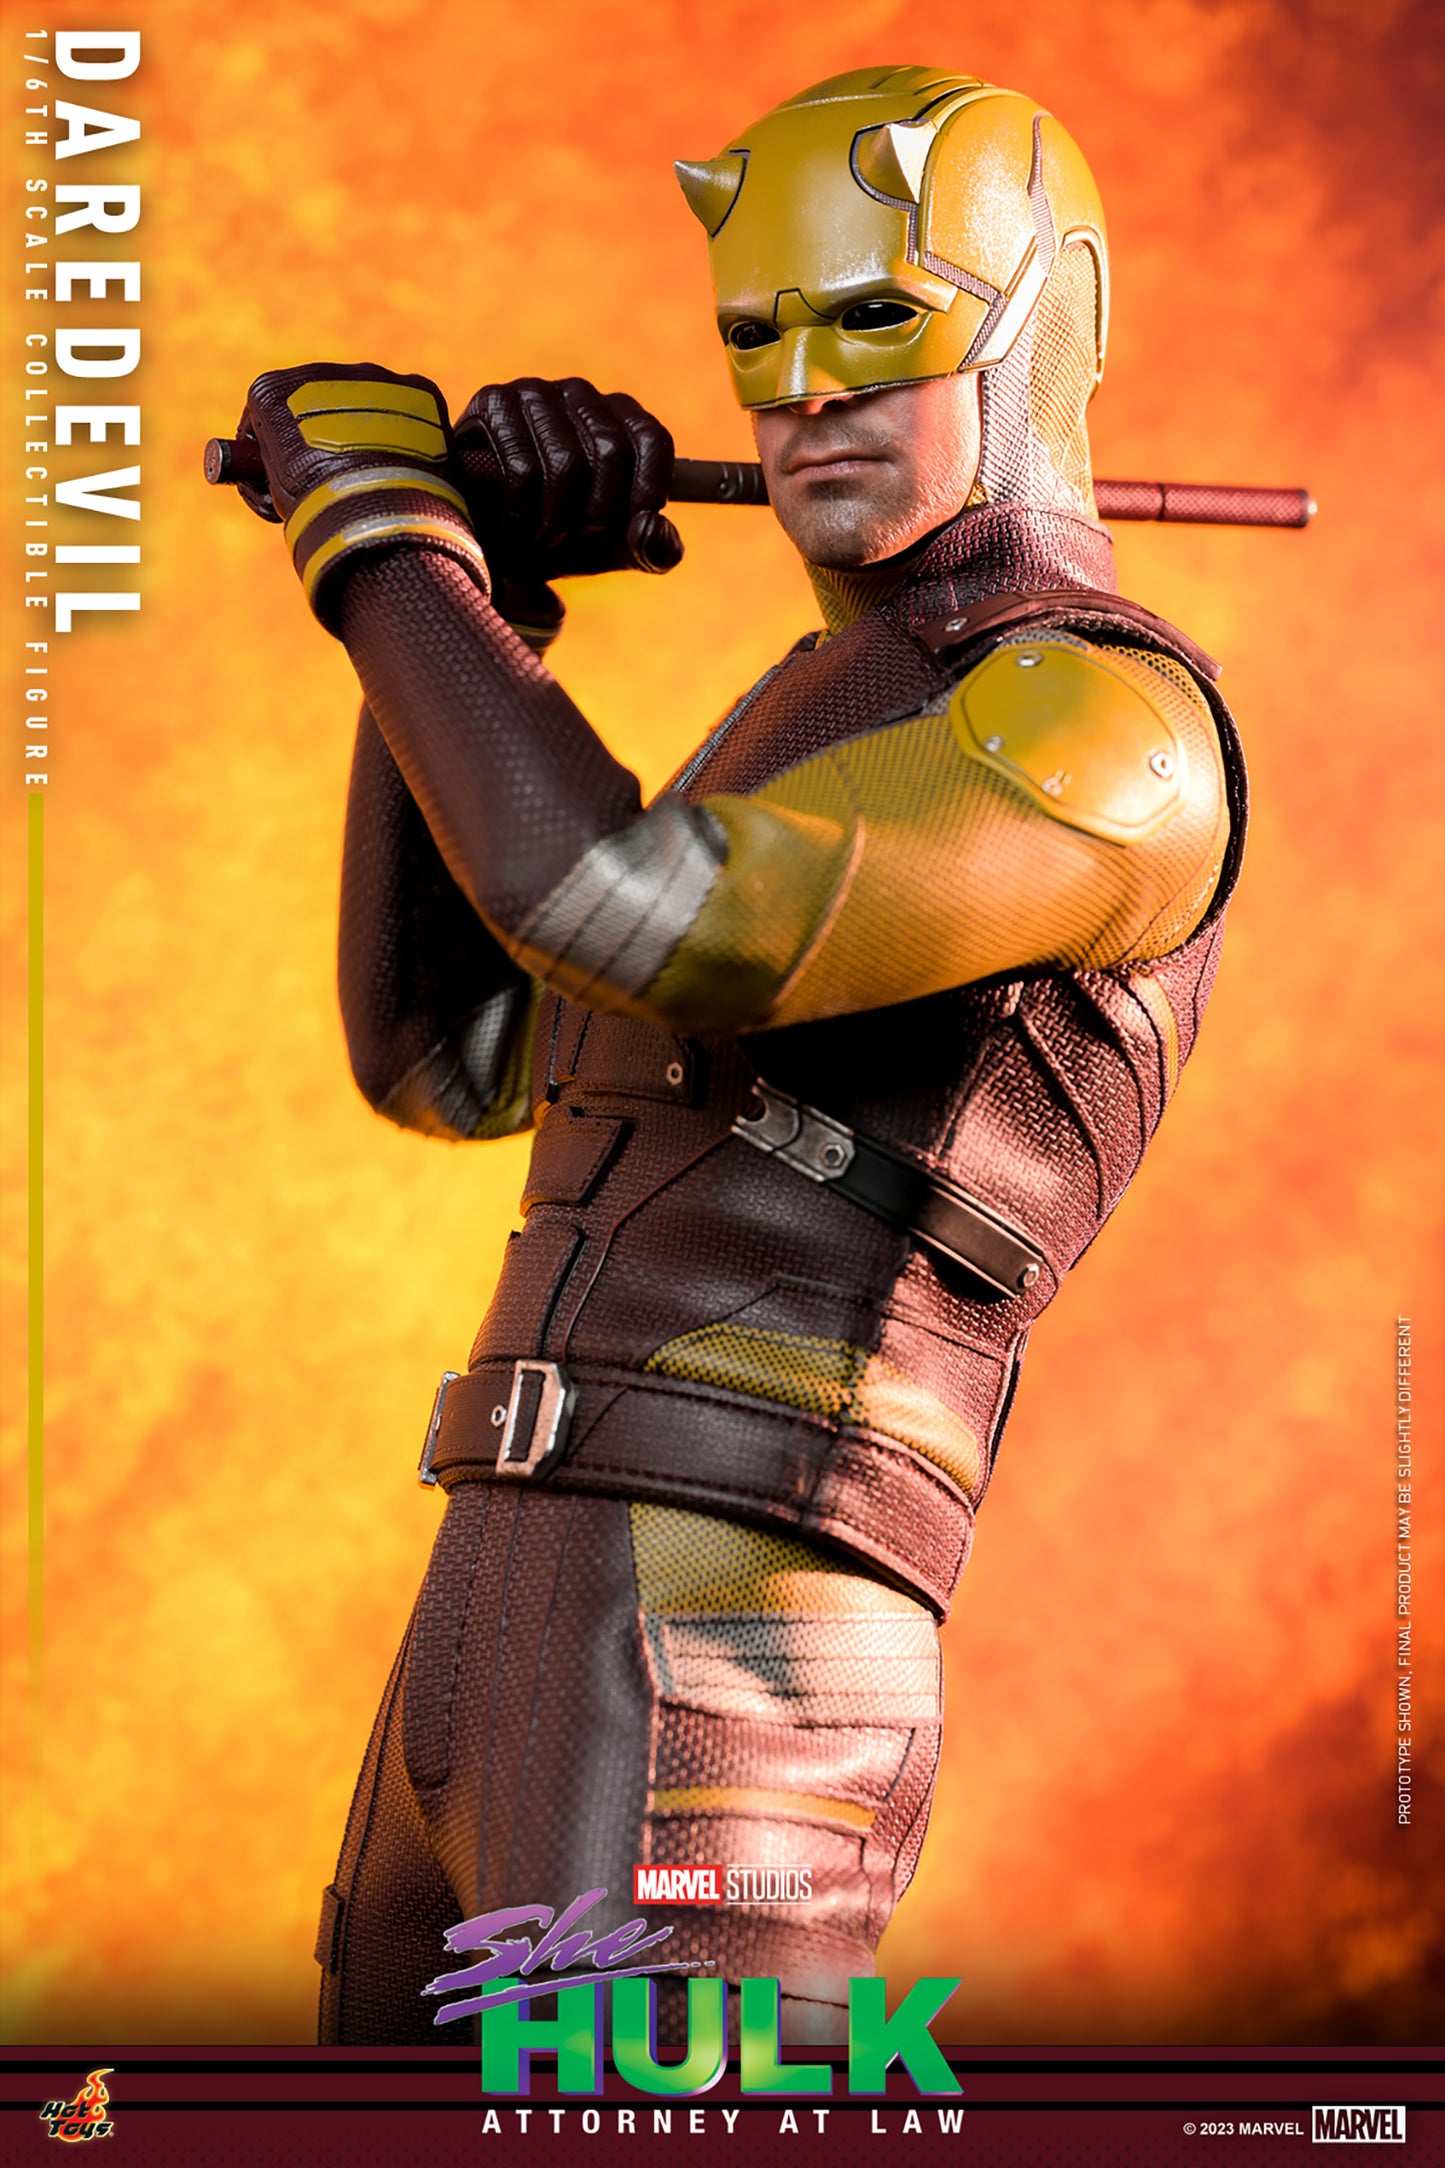 Daredevil Sixth Scale Figure by Hot Toys